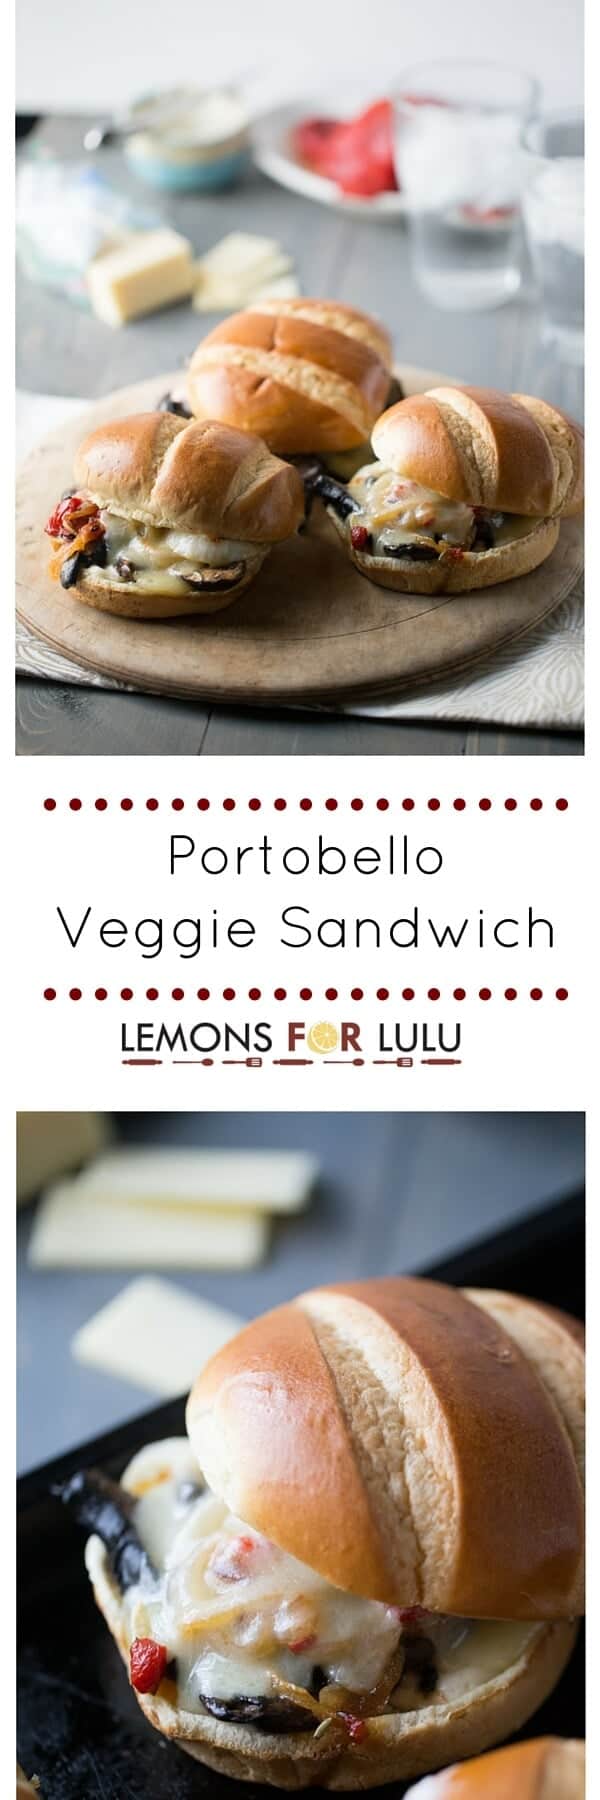 The meat will not be missed in this simple veggie sandwich recipe! Lots of thick portobello mushroom slices are piled high on a brioche roll then covered in tangy white cheddar cheese! A sandwich lovers dream!